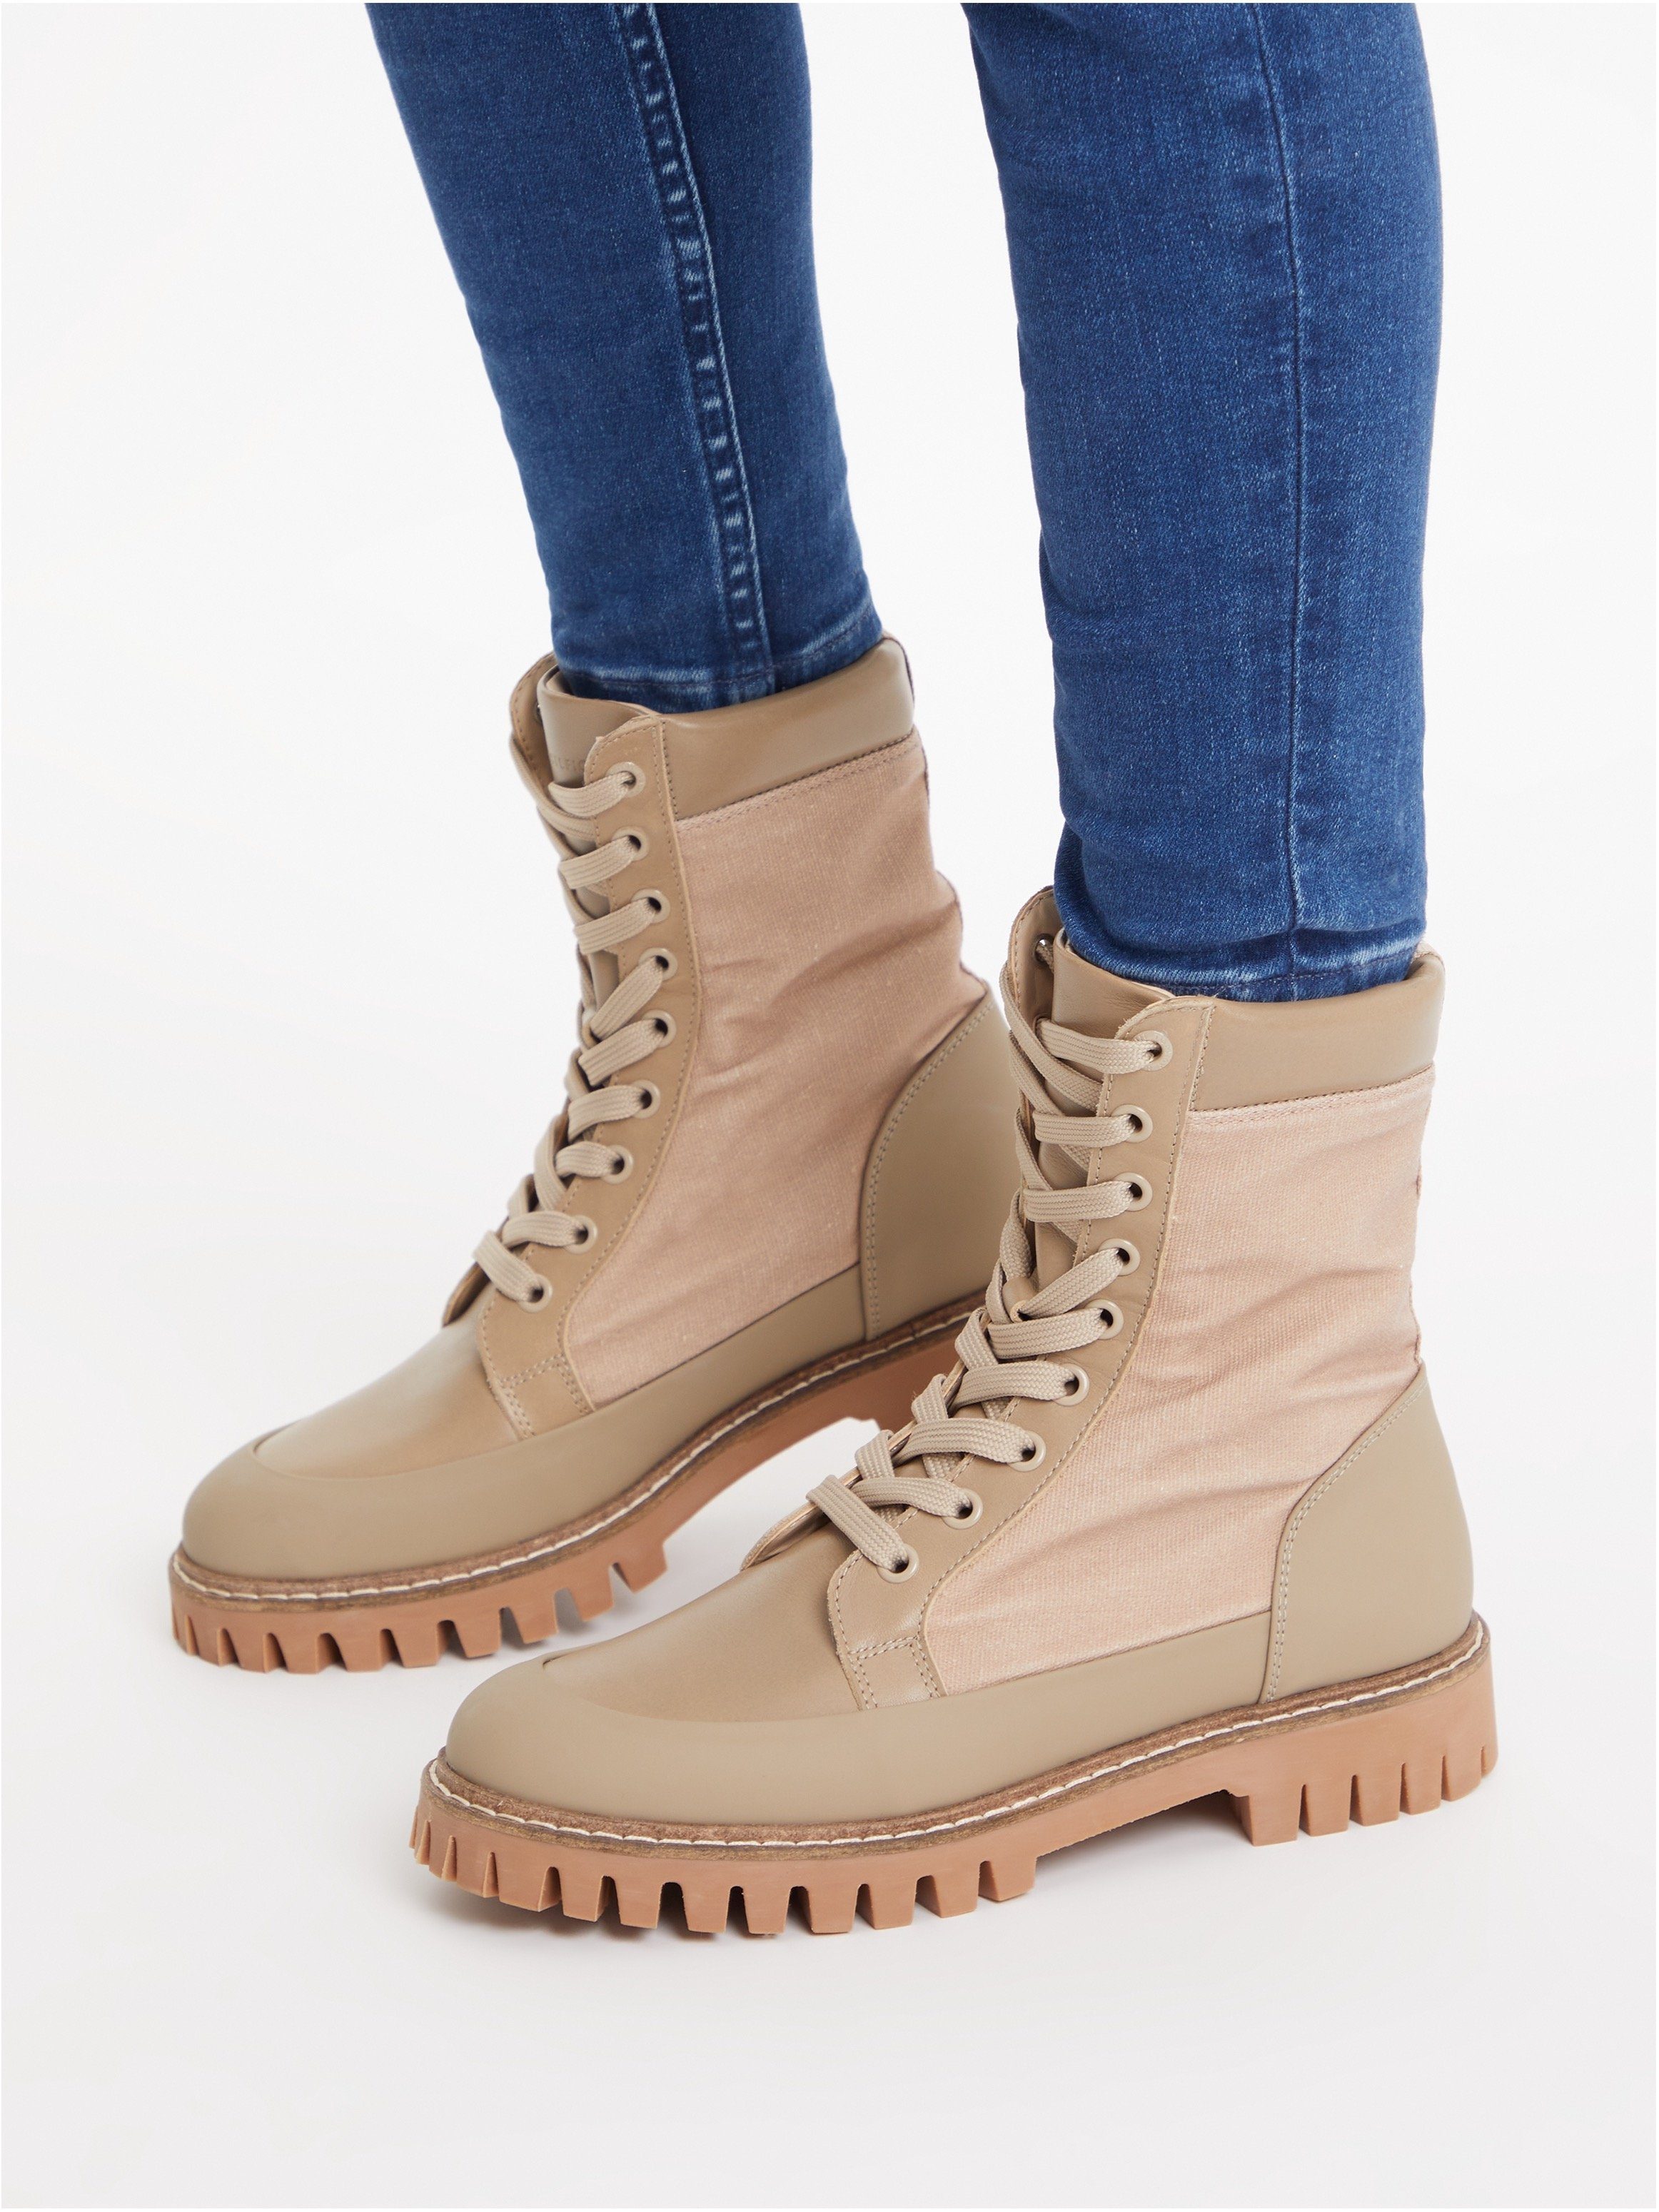 Tommy Hilfiger TH CASUAL UP Schnürboots LACE Style BOOT in beige derbem